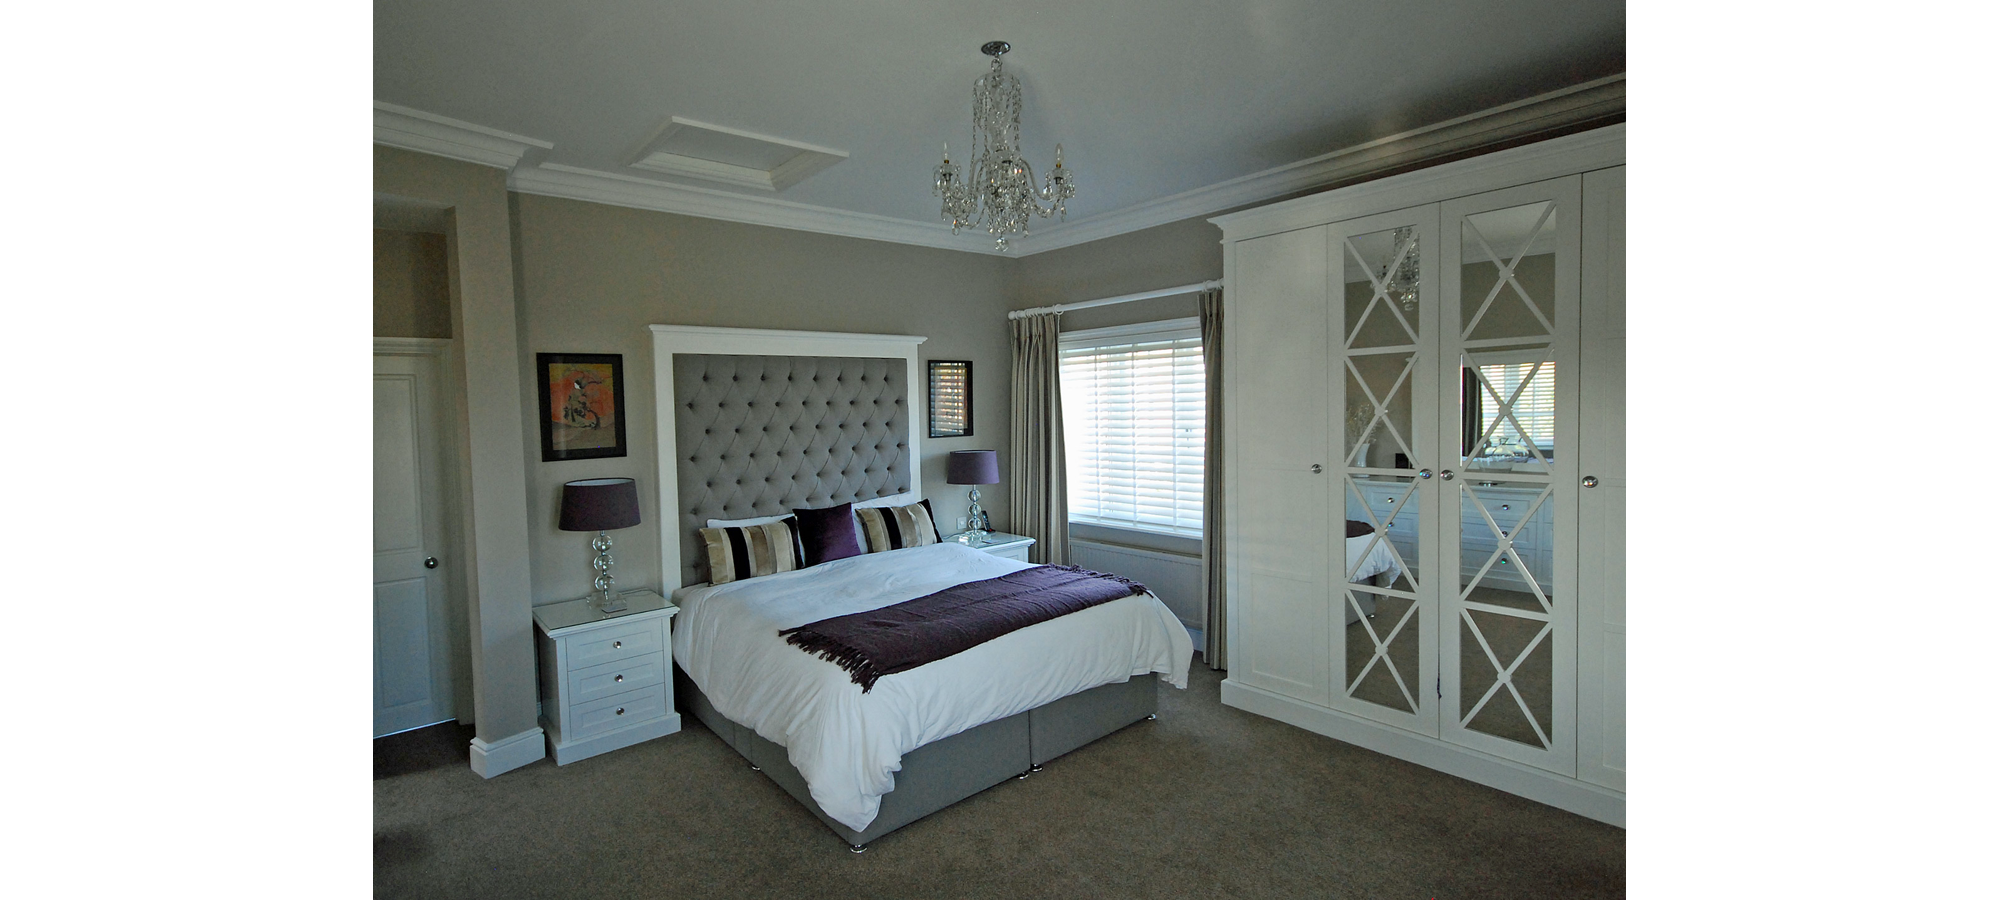 show pictures of bedroom furniture